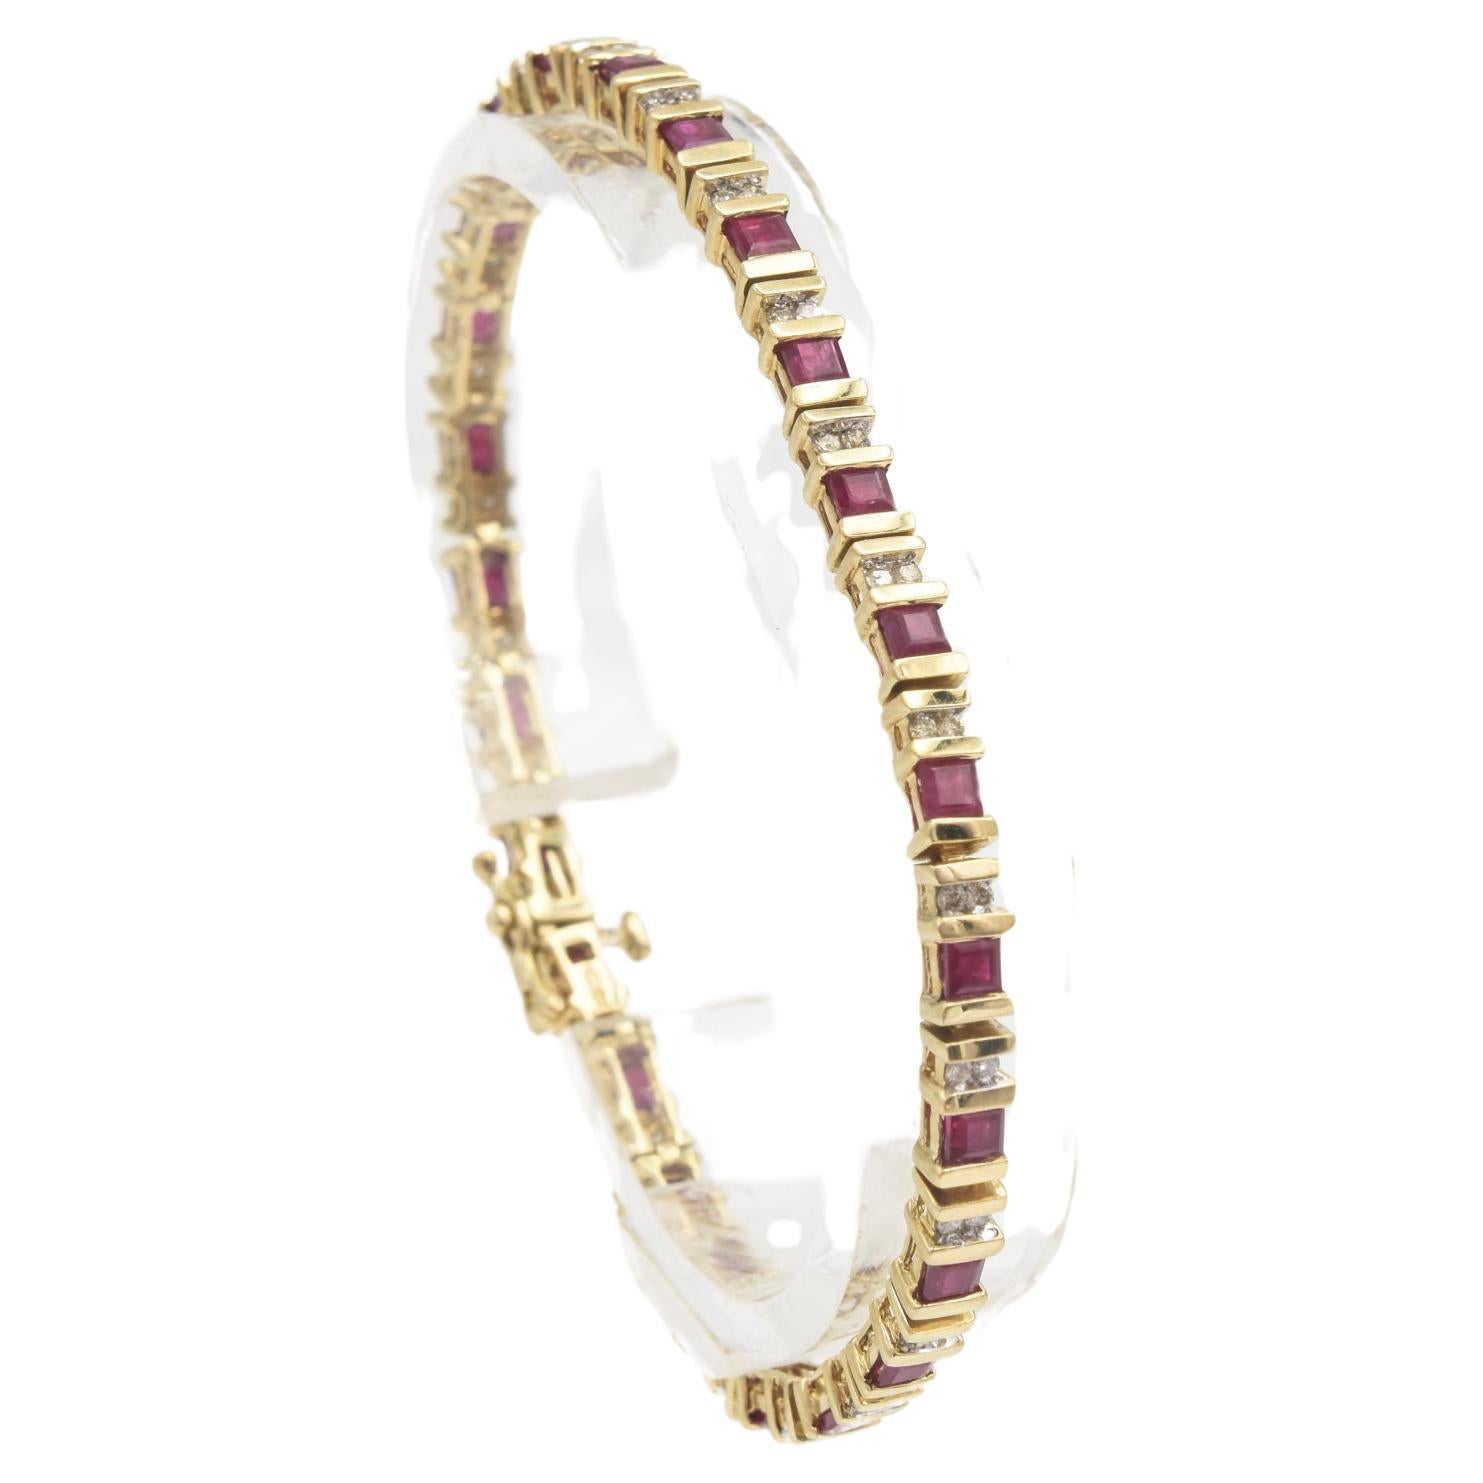 Ruby and diamond tennis bracelet featuring princess cut rubies set between 2 gold bars with a pair of diamonds between each link mounted in 14k yellow gold with push button clasp and figure eight clasp.